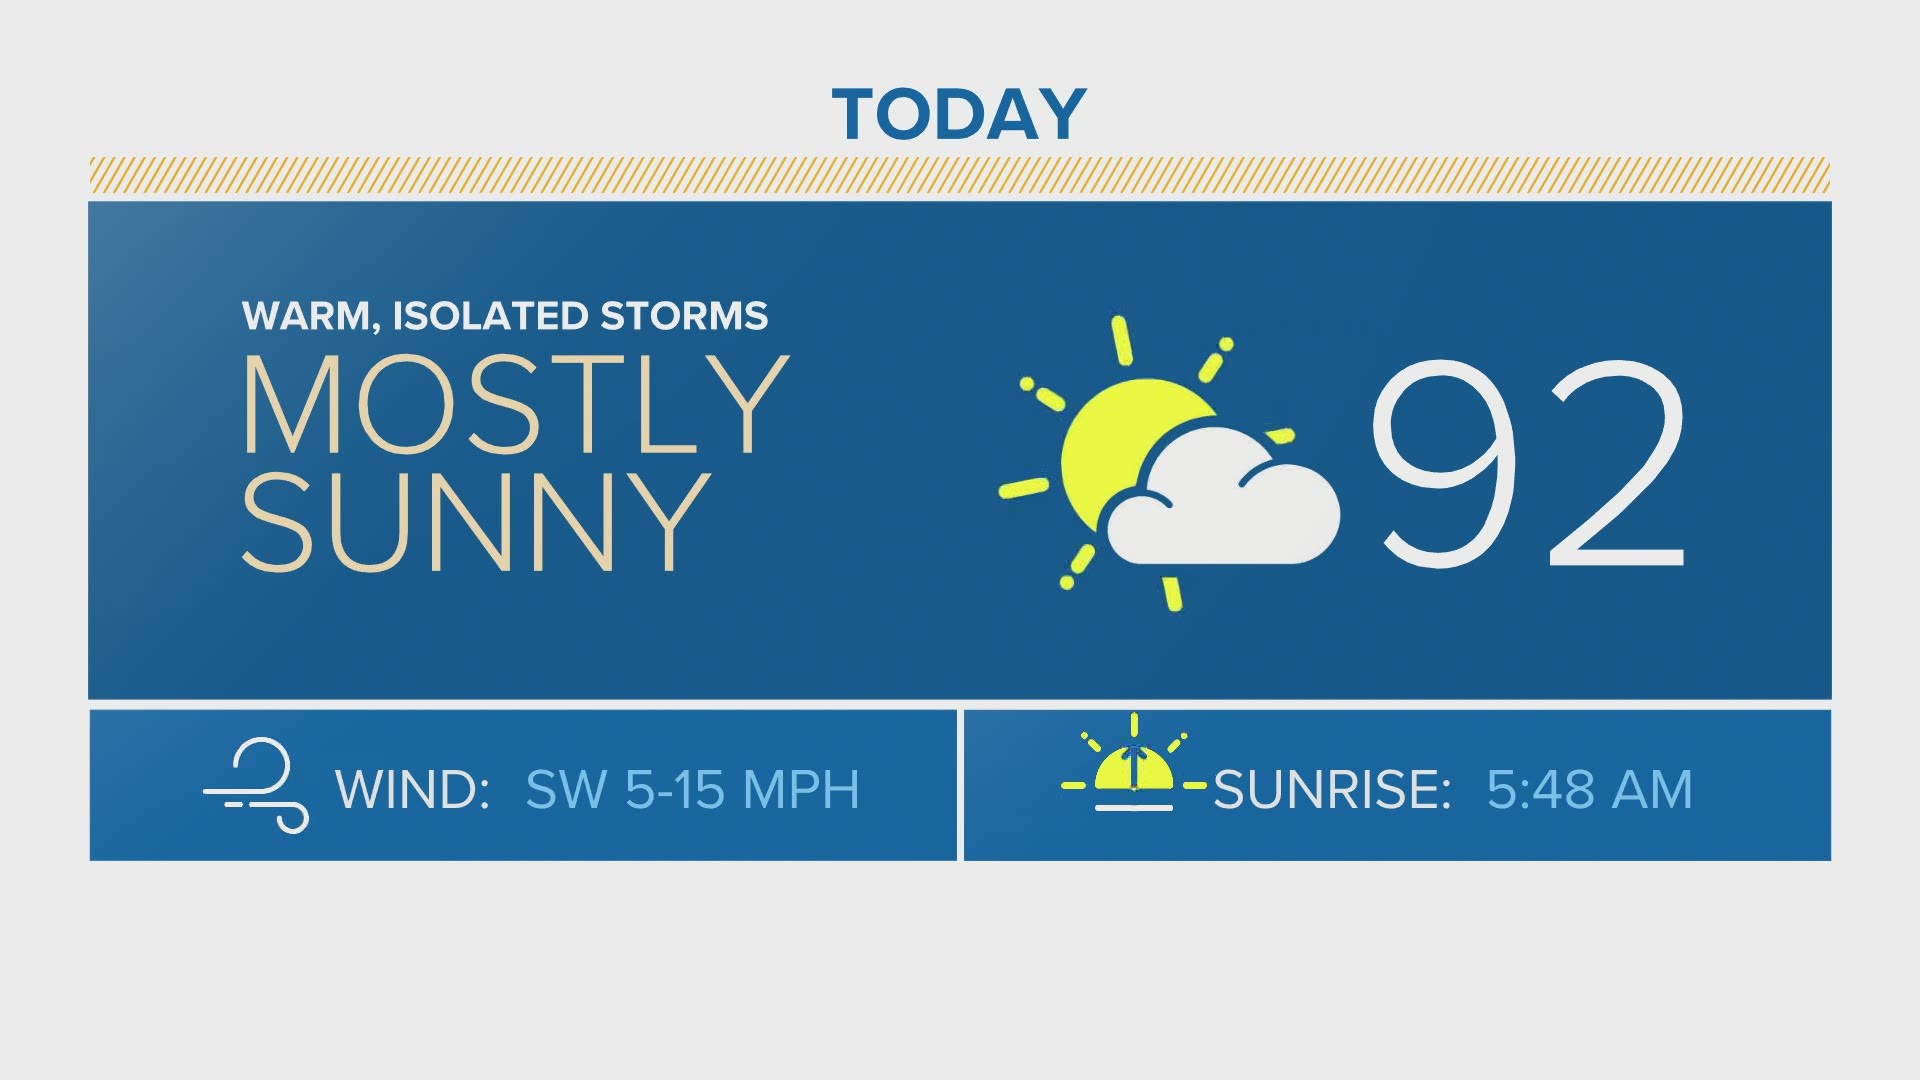 Plenty of sun – highs in the mid 90s and lows in the low 70s.